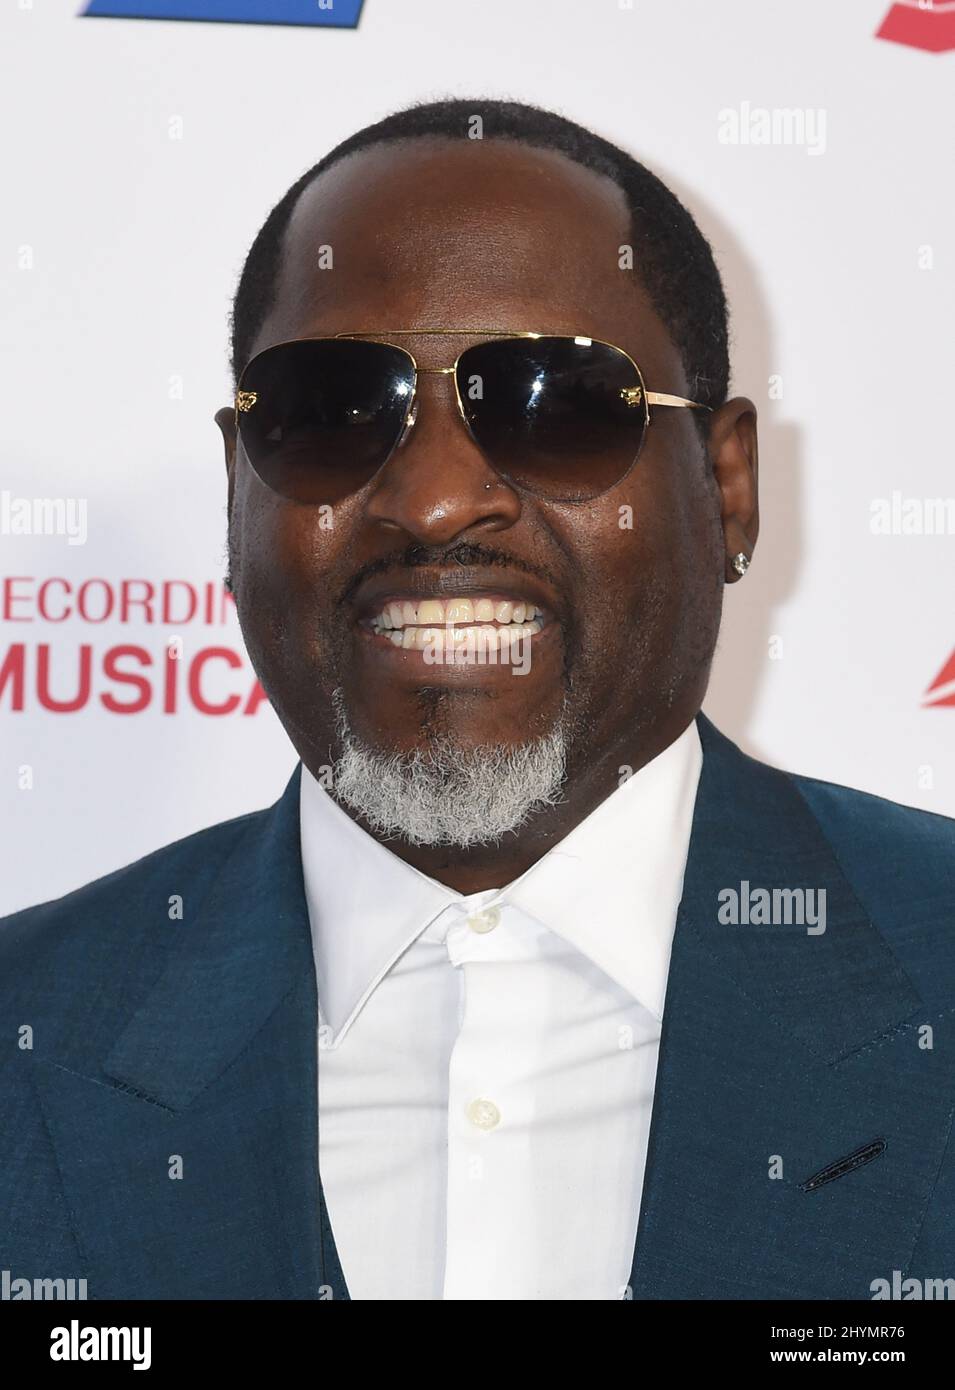 Johnny Gill frequenta il MusiCares Person of the Year honoring Aerosmith, tenutosi a Los Angeles, California Foto Stock